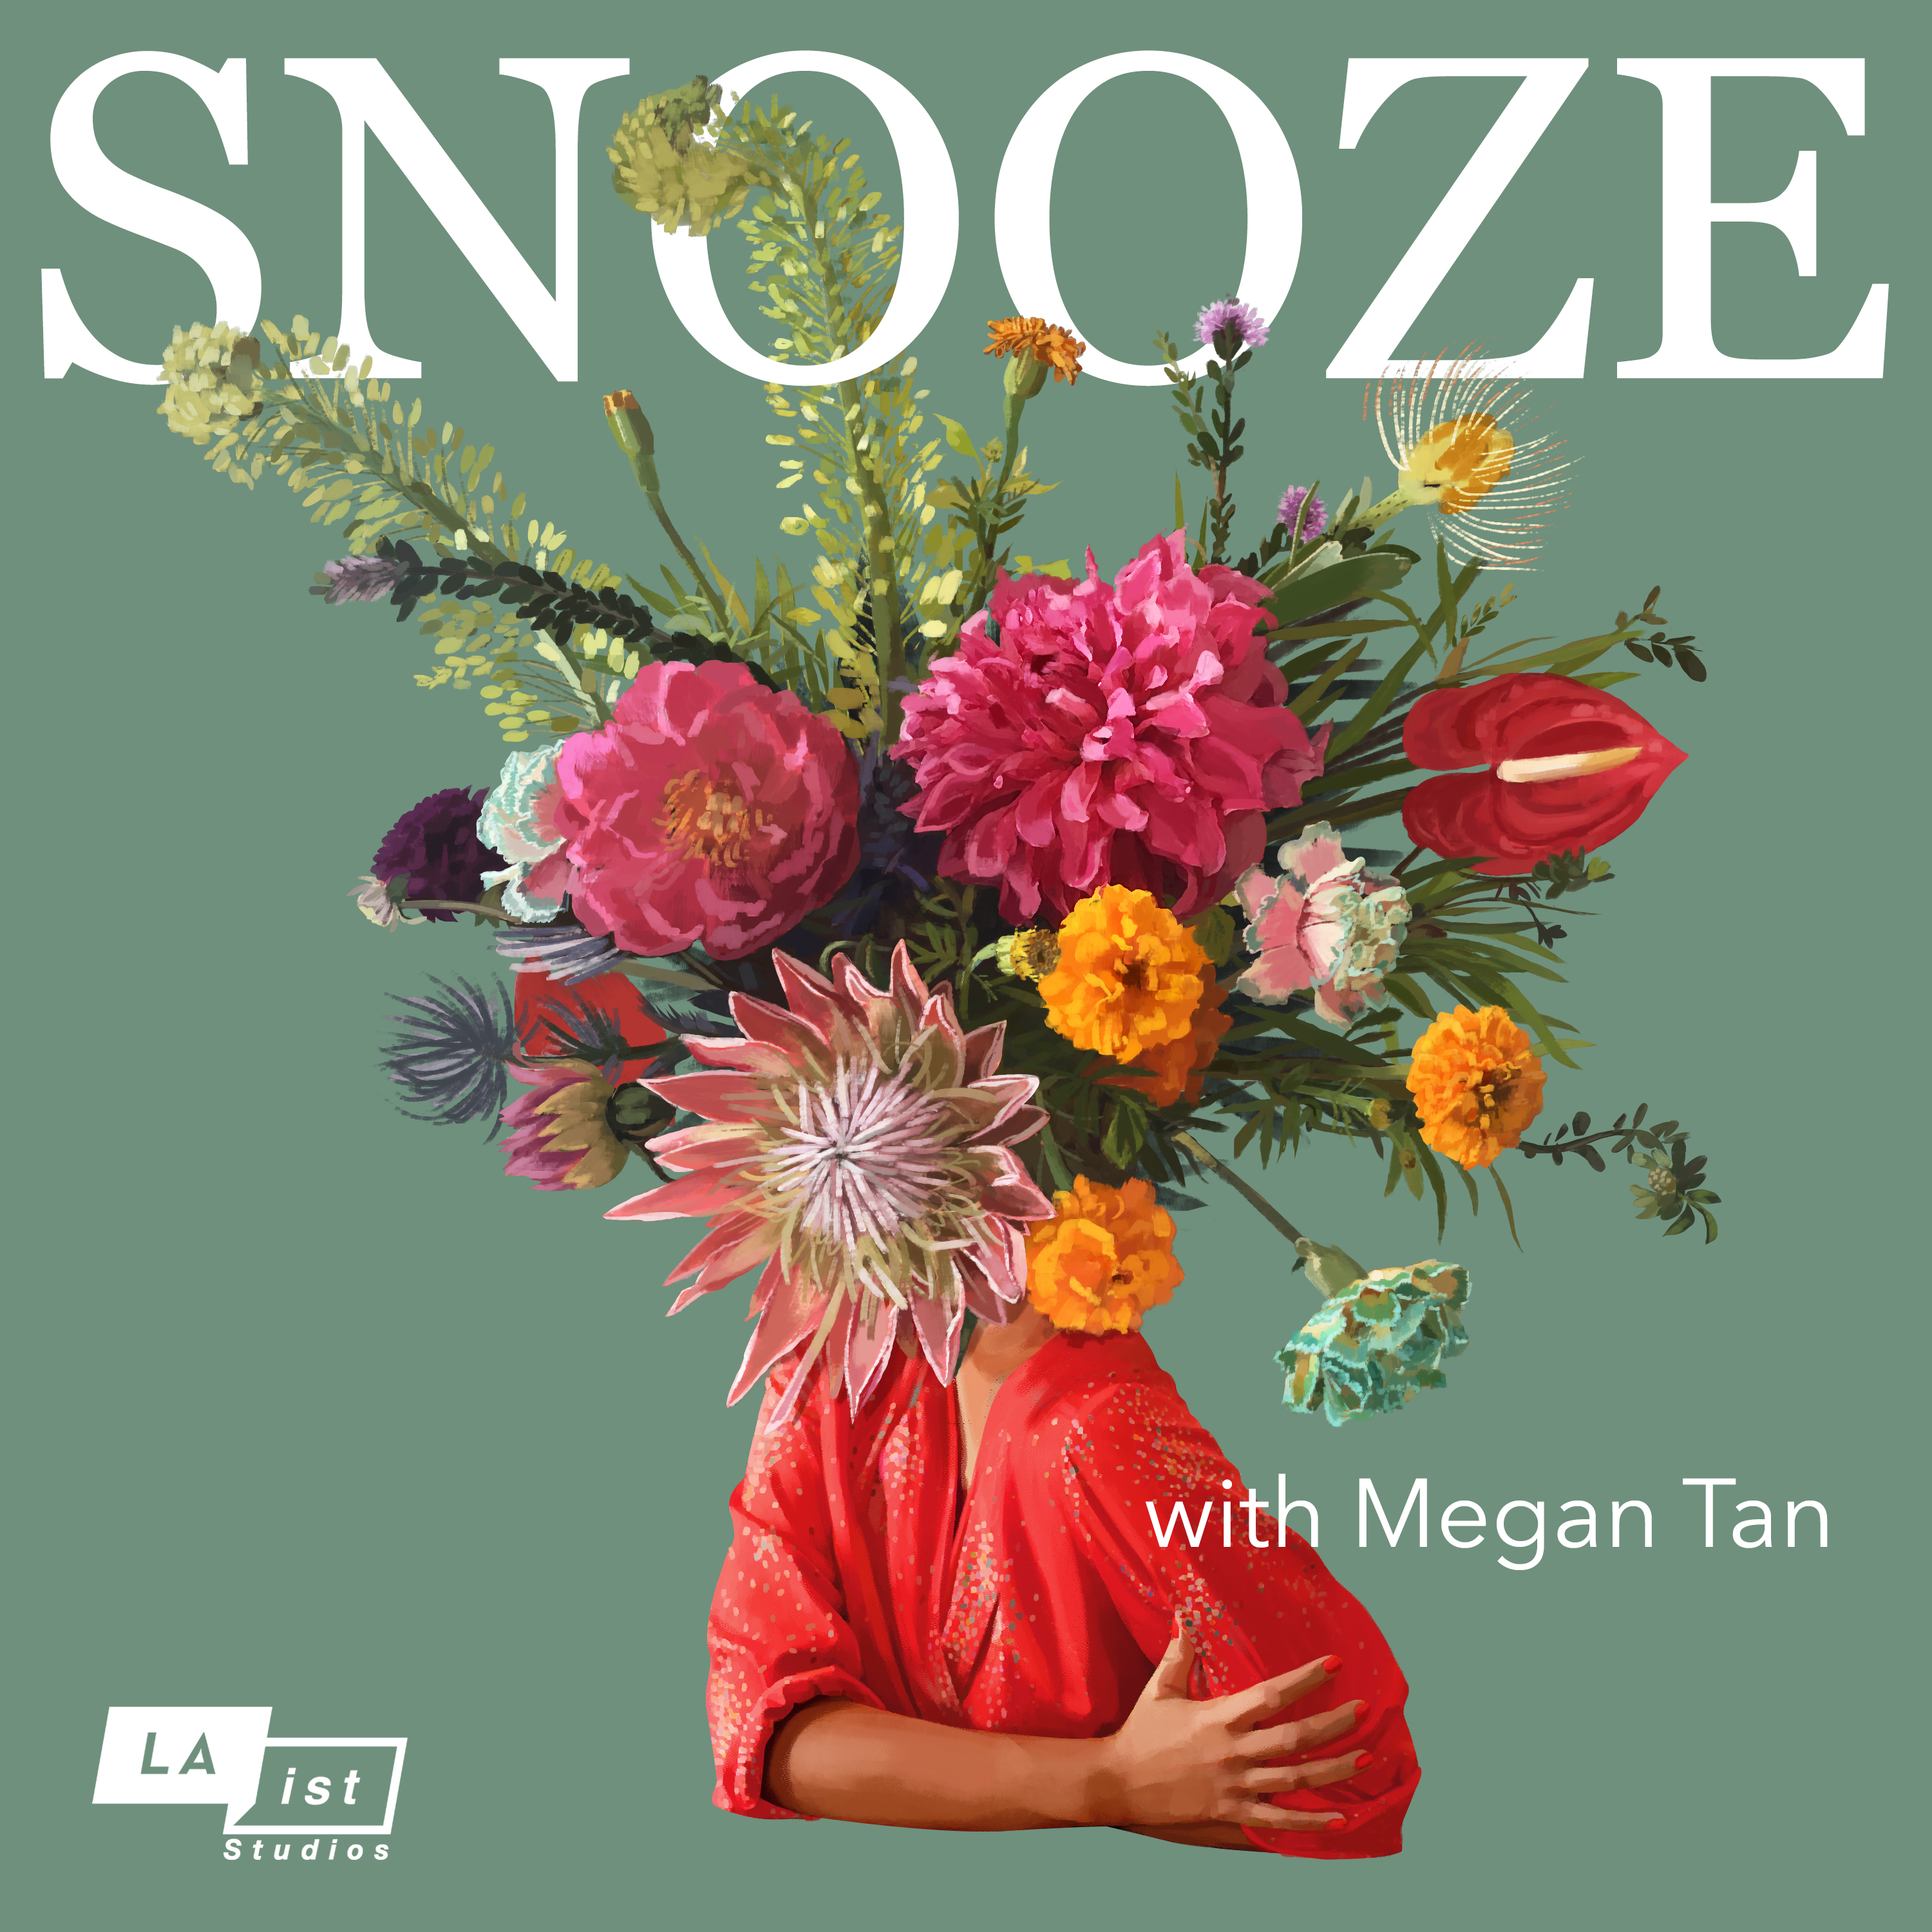 S1Introducing Snooze, from LAist Studios